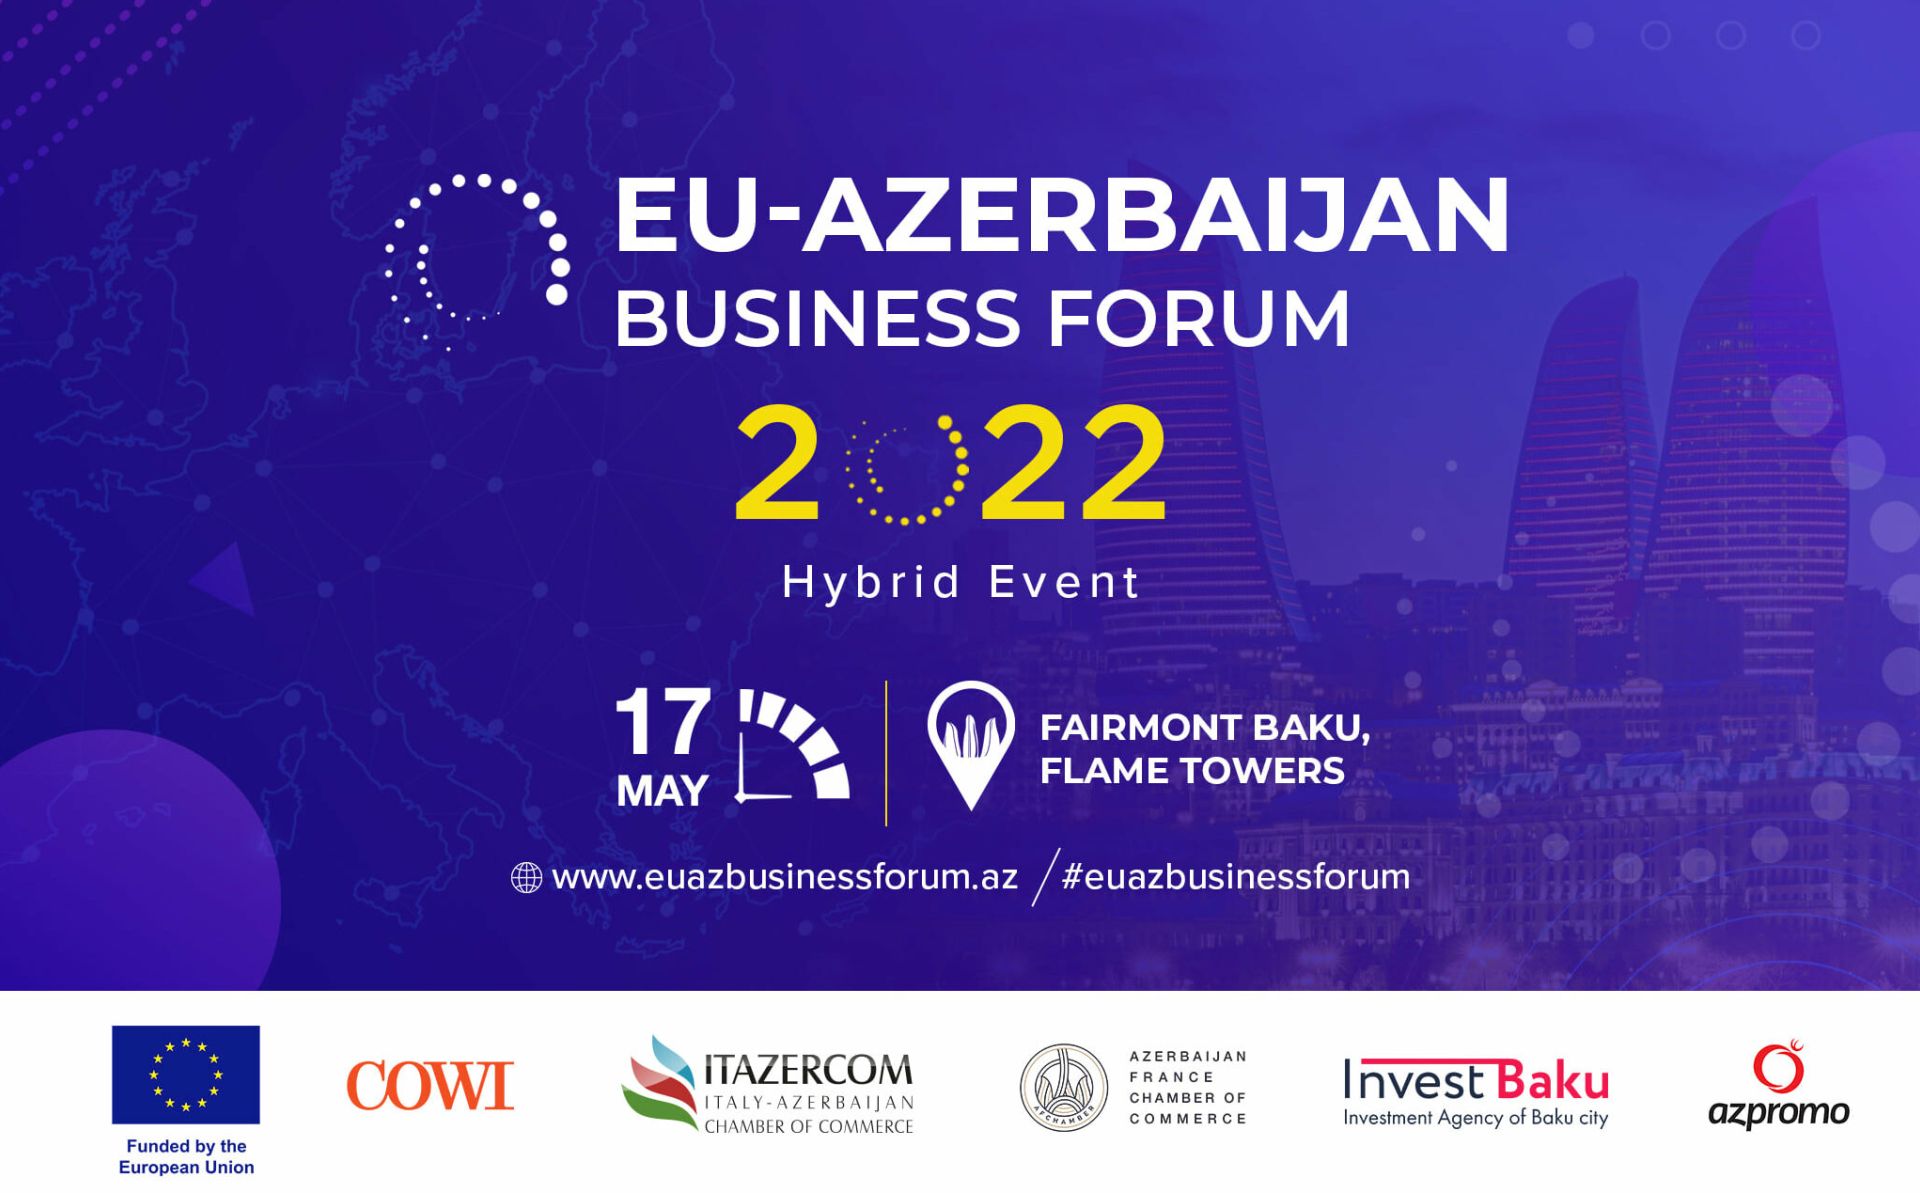 EU-Azerbaijan Business Forum 2022 will take place on 17 May – registration is open